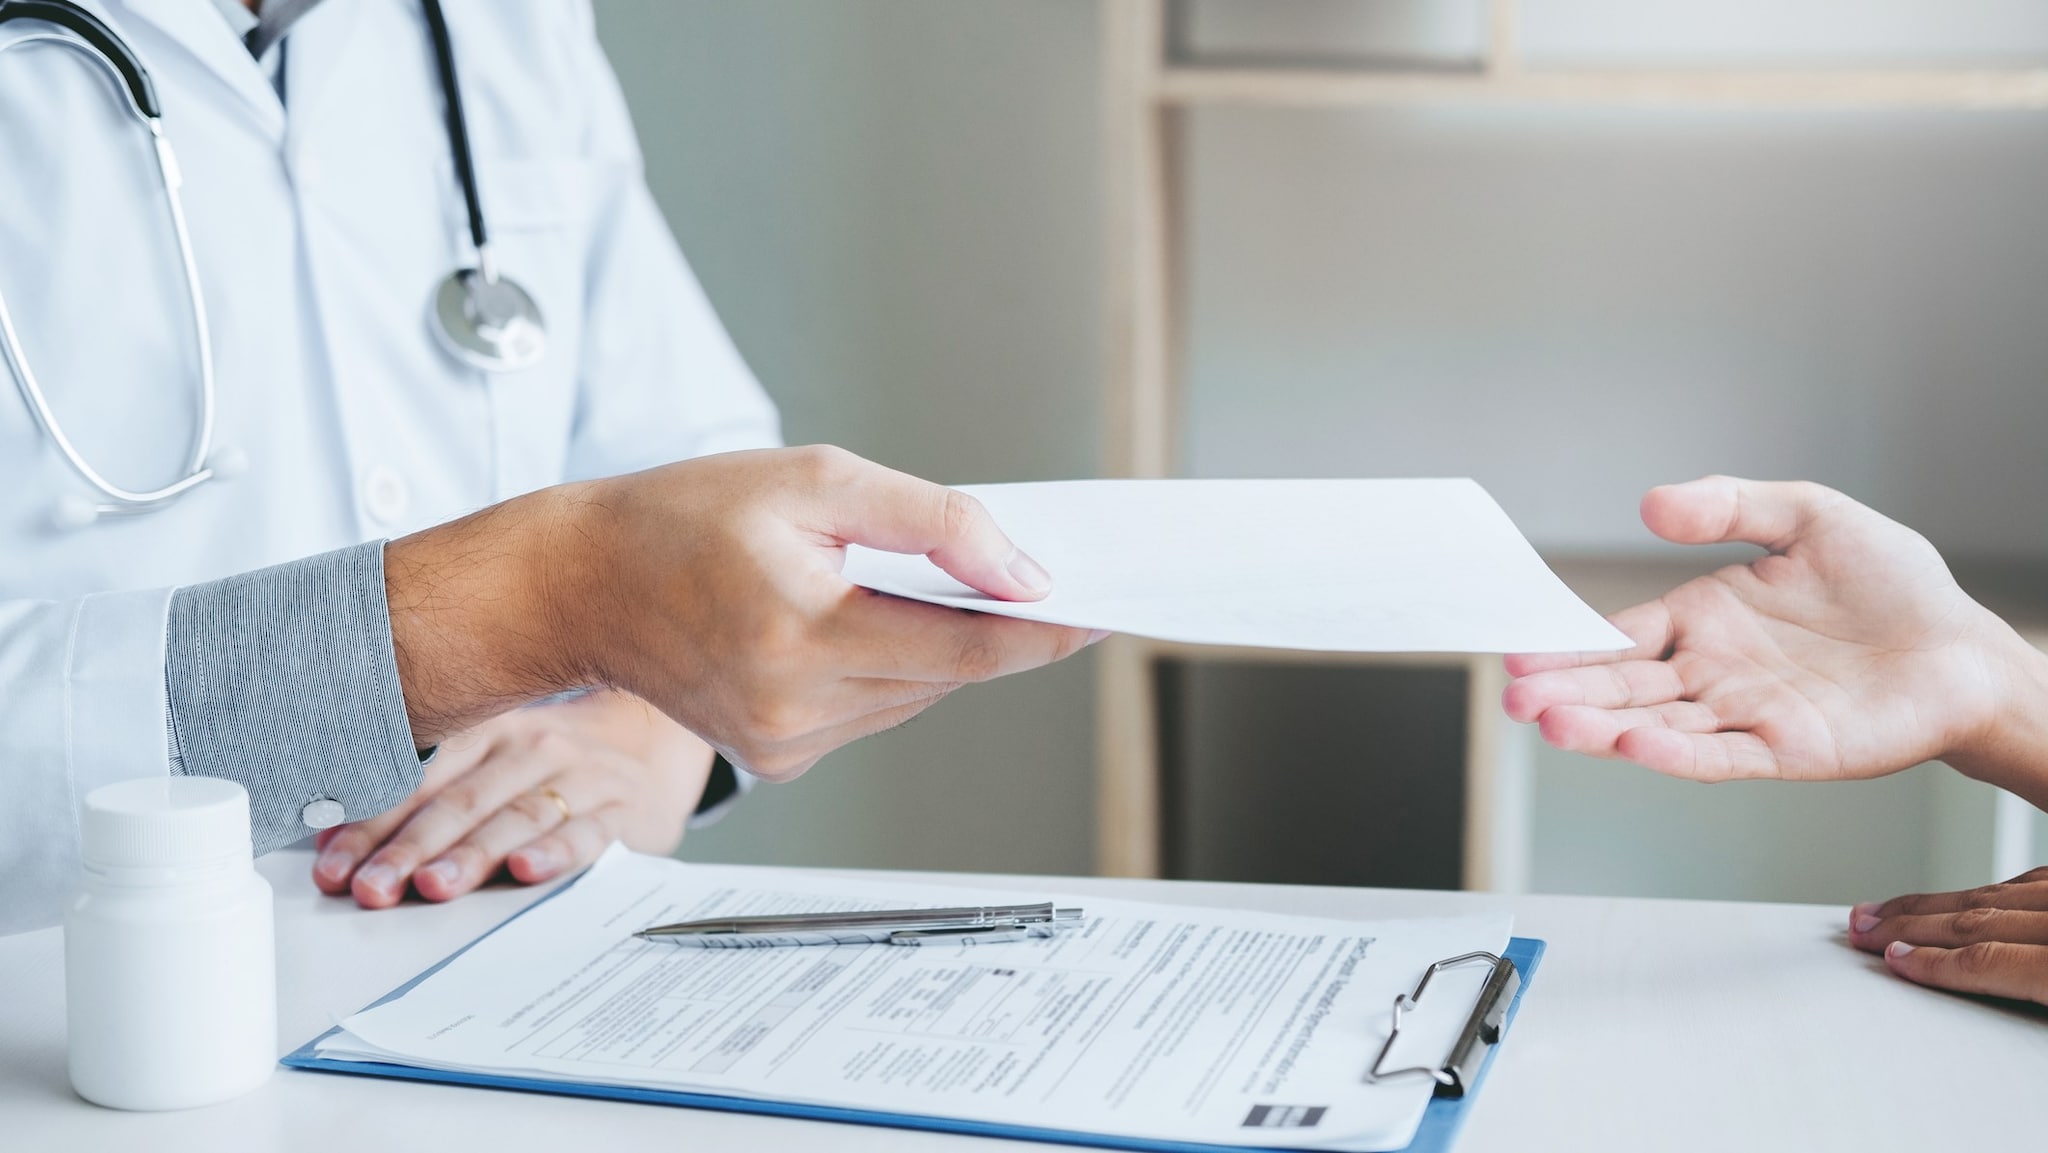 Doctor handing a patient a referral form